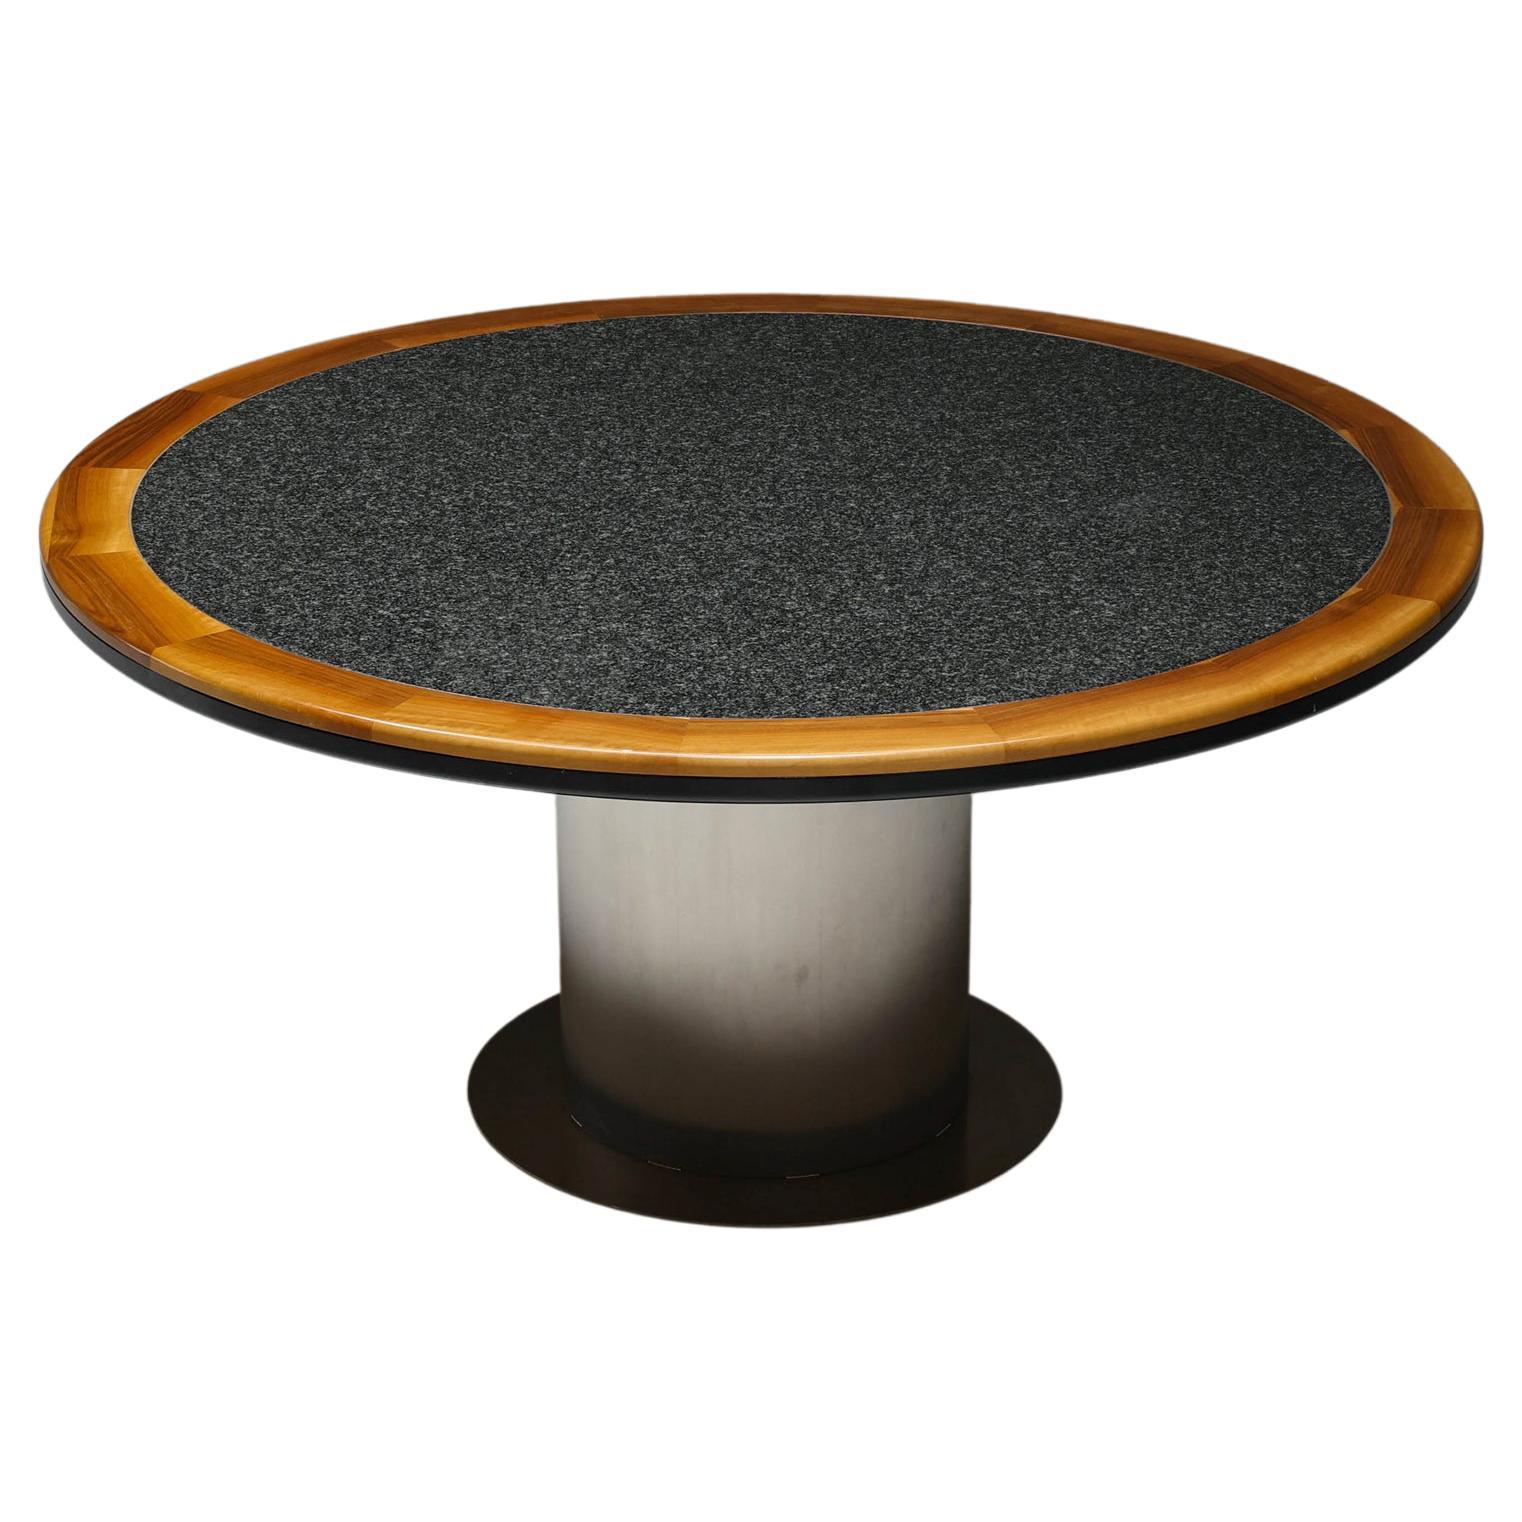 Post-Modern Round Yacht Style Dining Table, Granite and Stainless Steel, 1980's